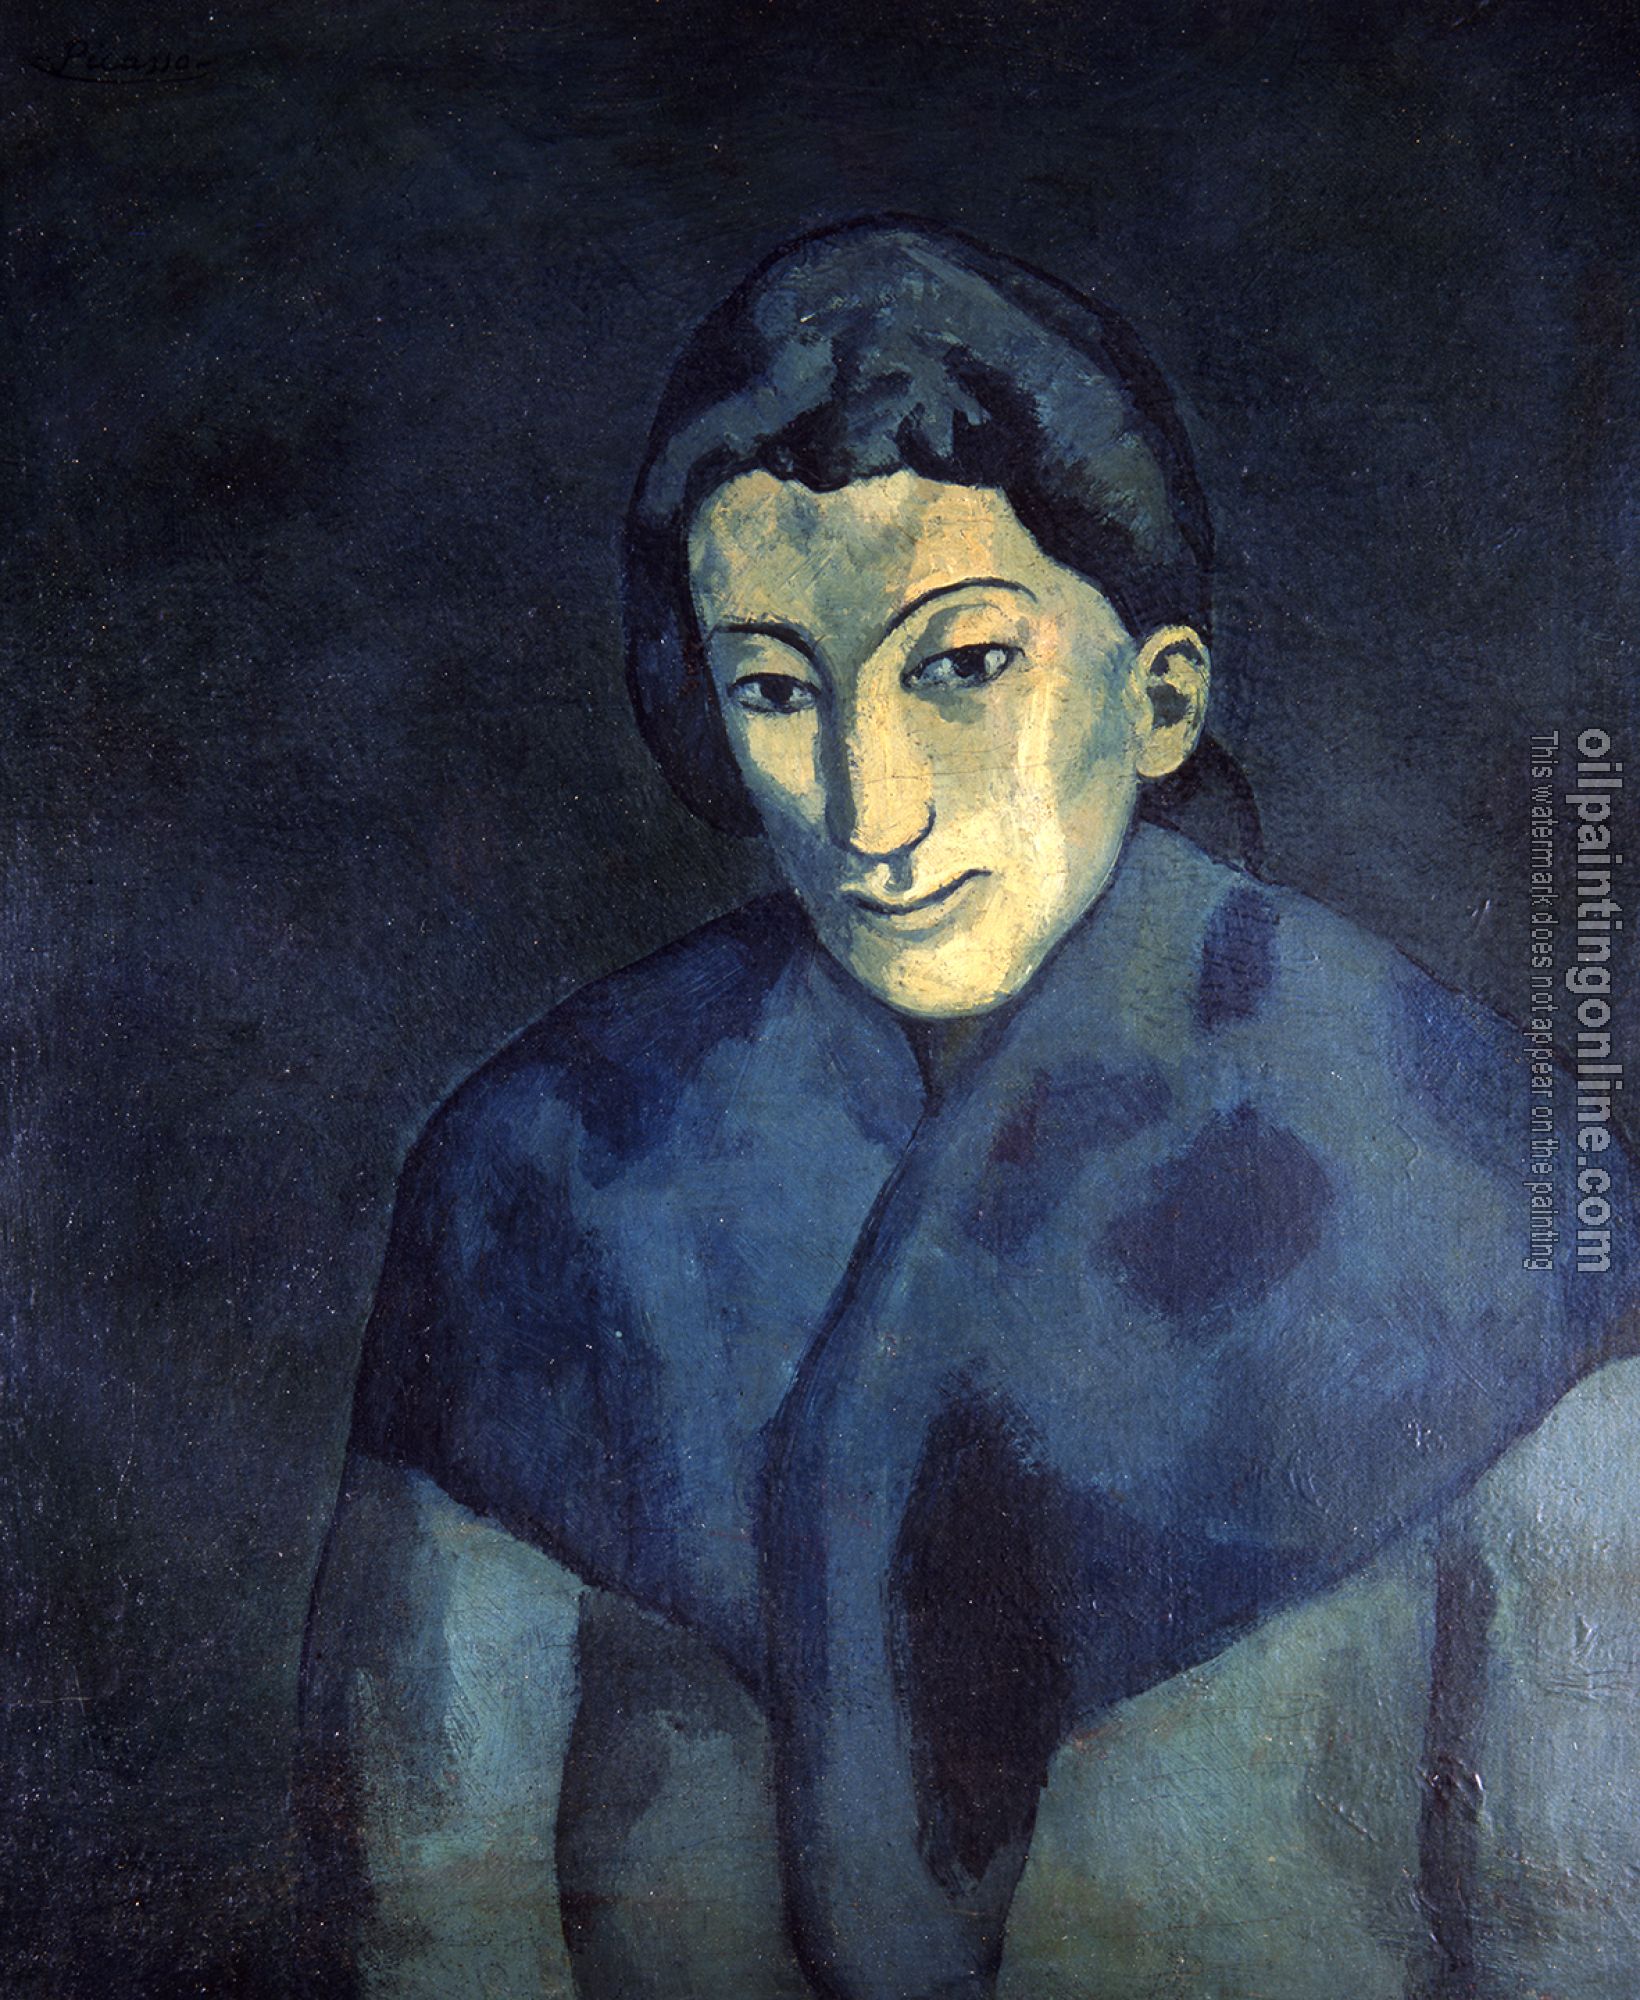 Picasso, Pablo - woman with a shawl